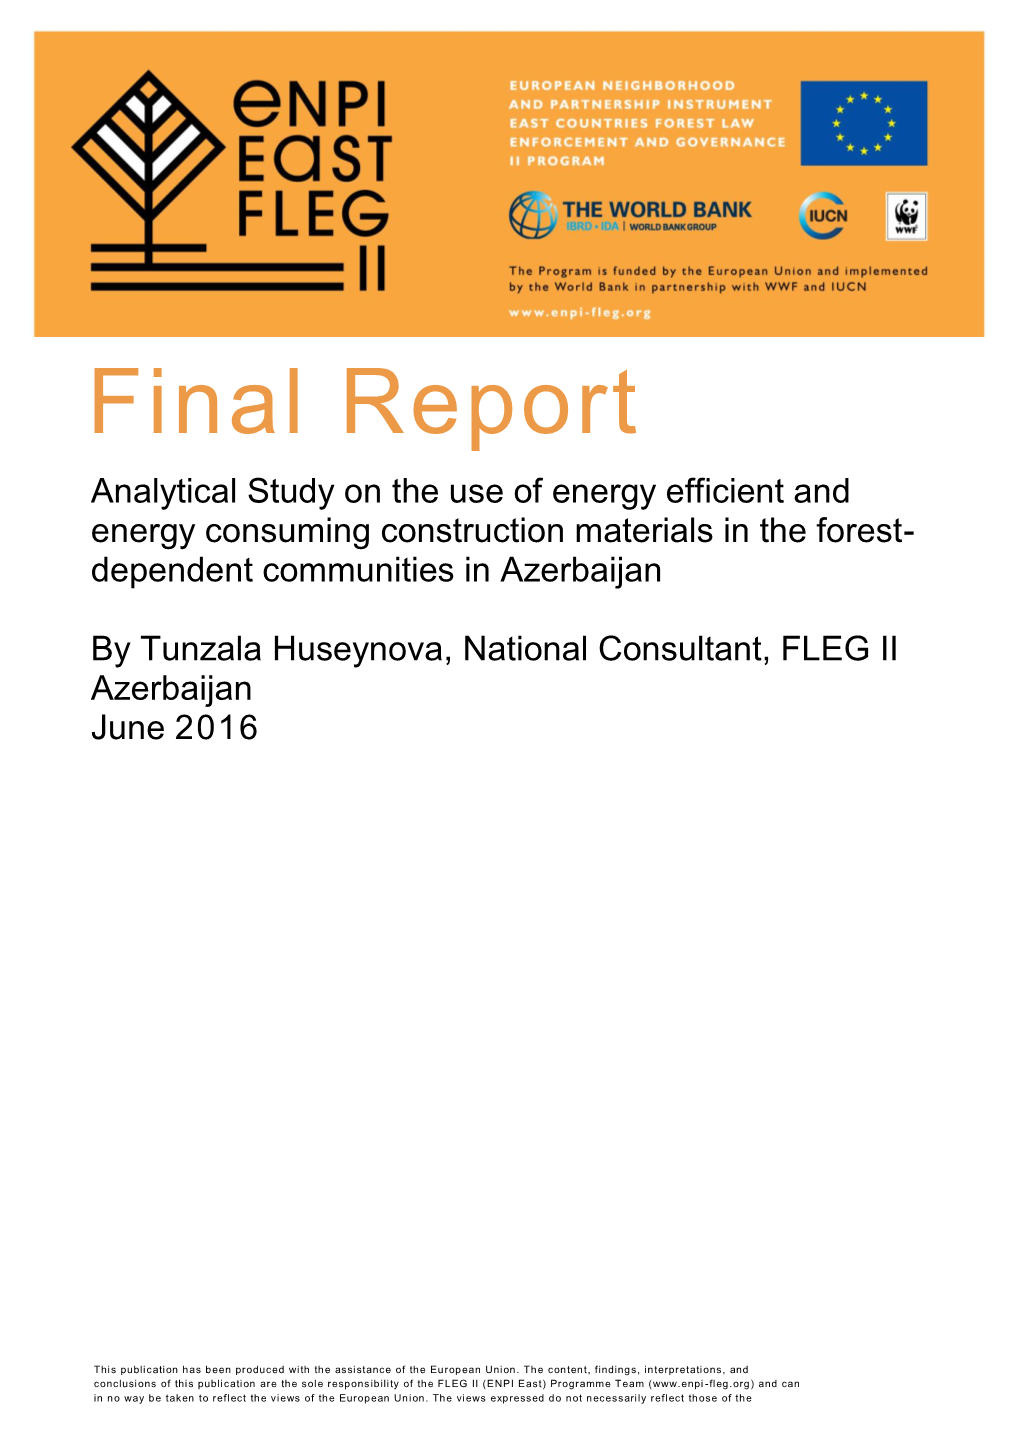 Study on the Use of Energy Efficient and Energy Consuming Construction Materials in the Forest- Dependent Communities in Azerbaijan